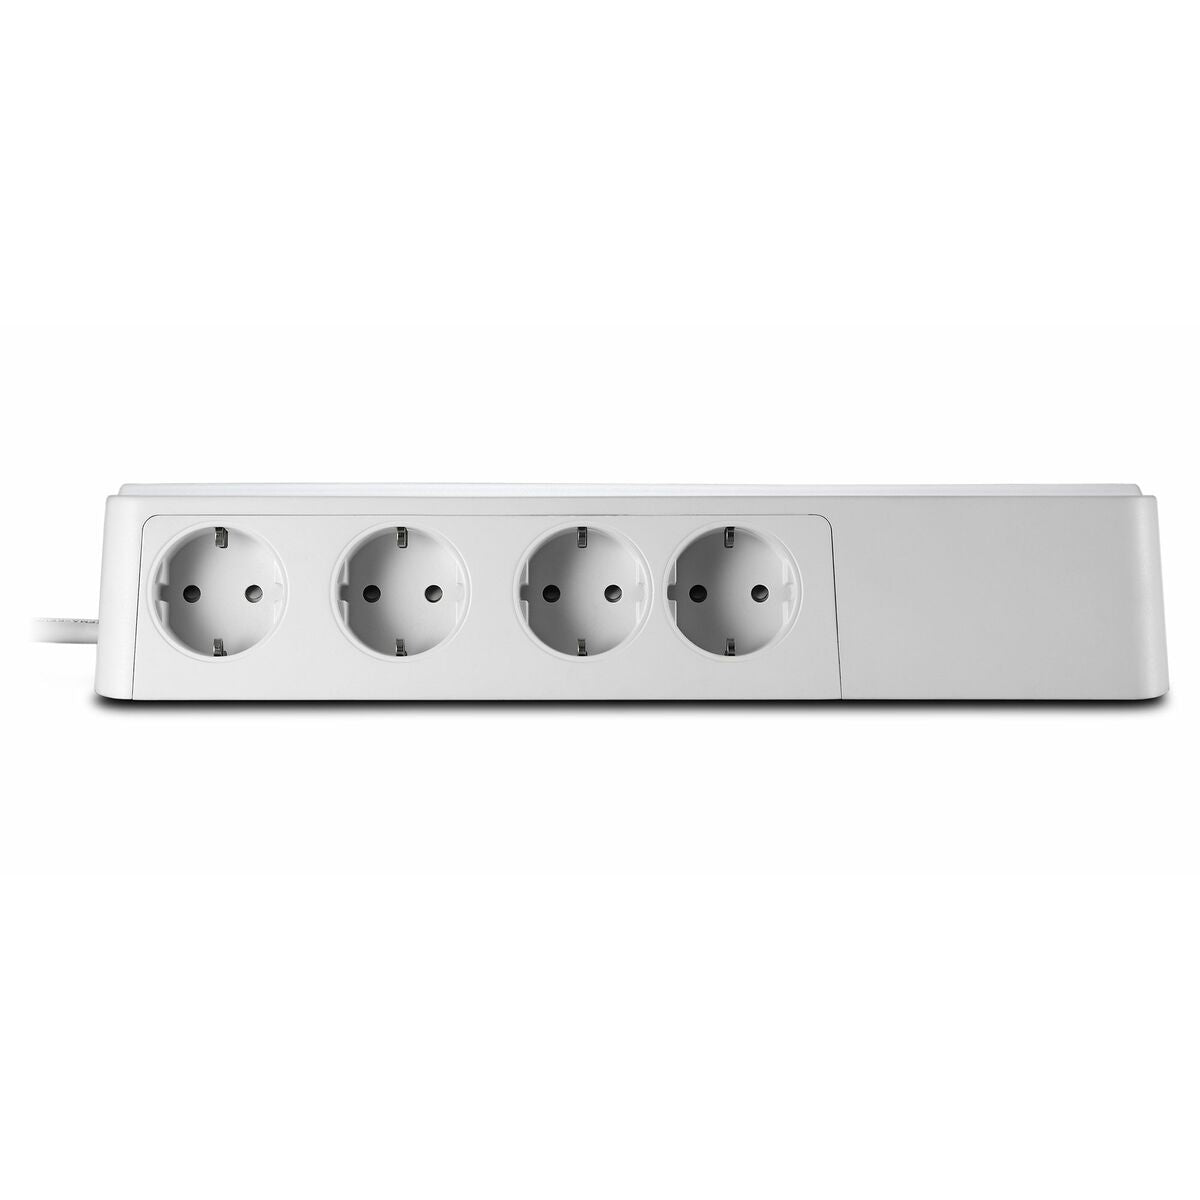 Power Socket 8 Sockets with Switch APC PM8-GR (2 m)